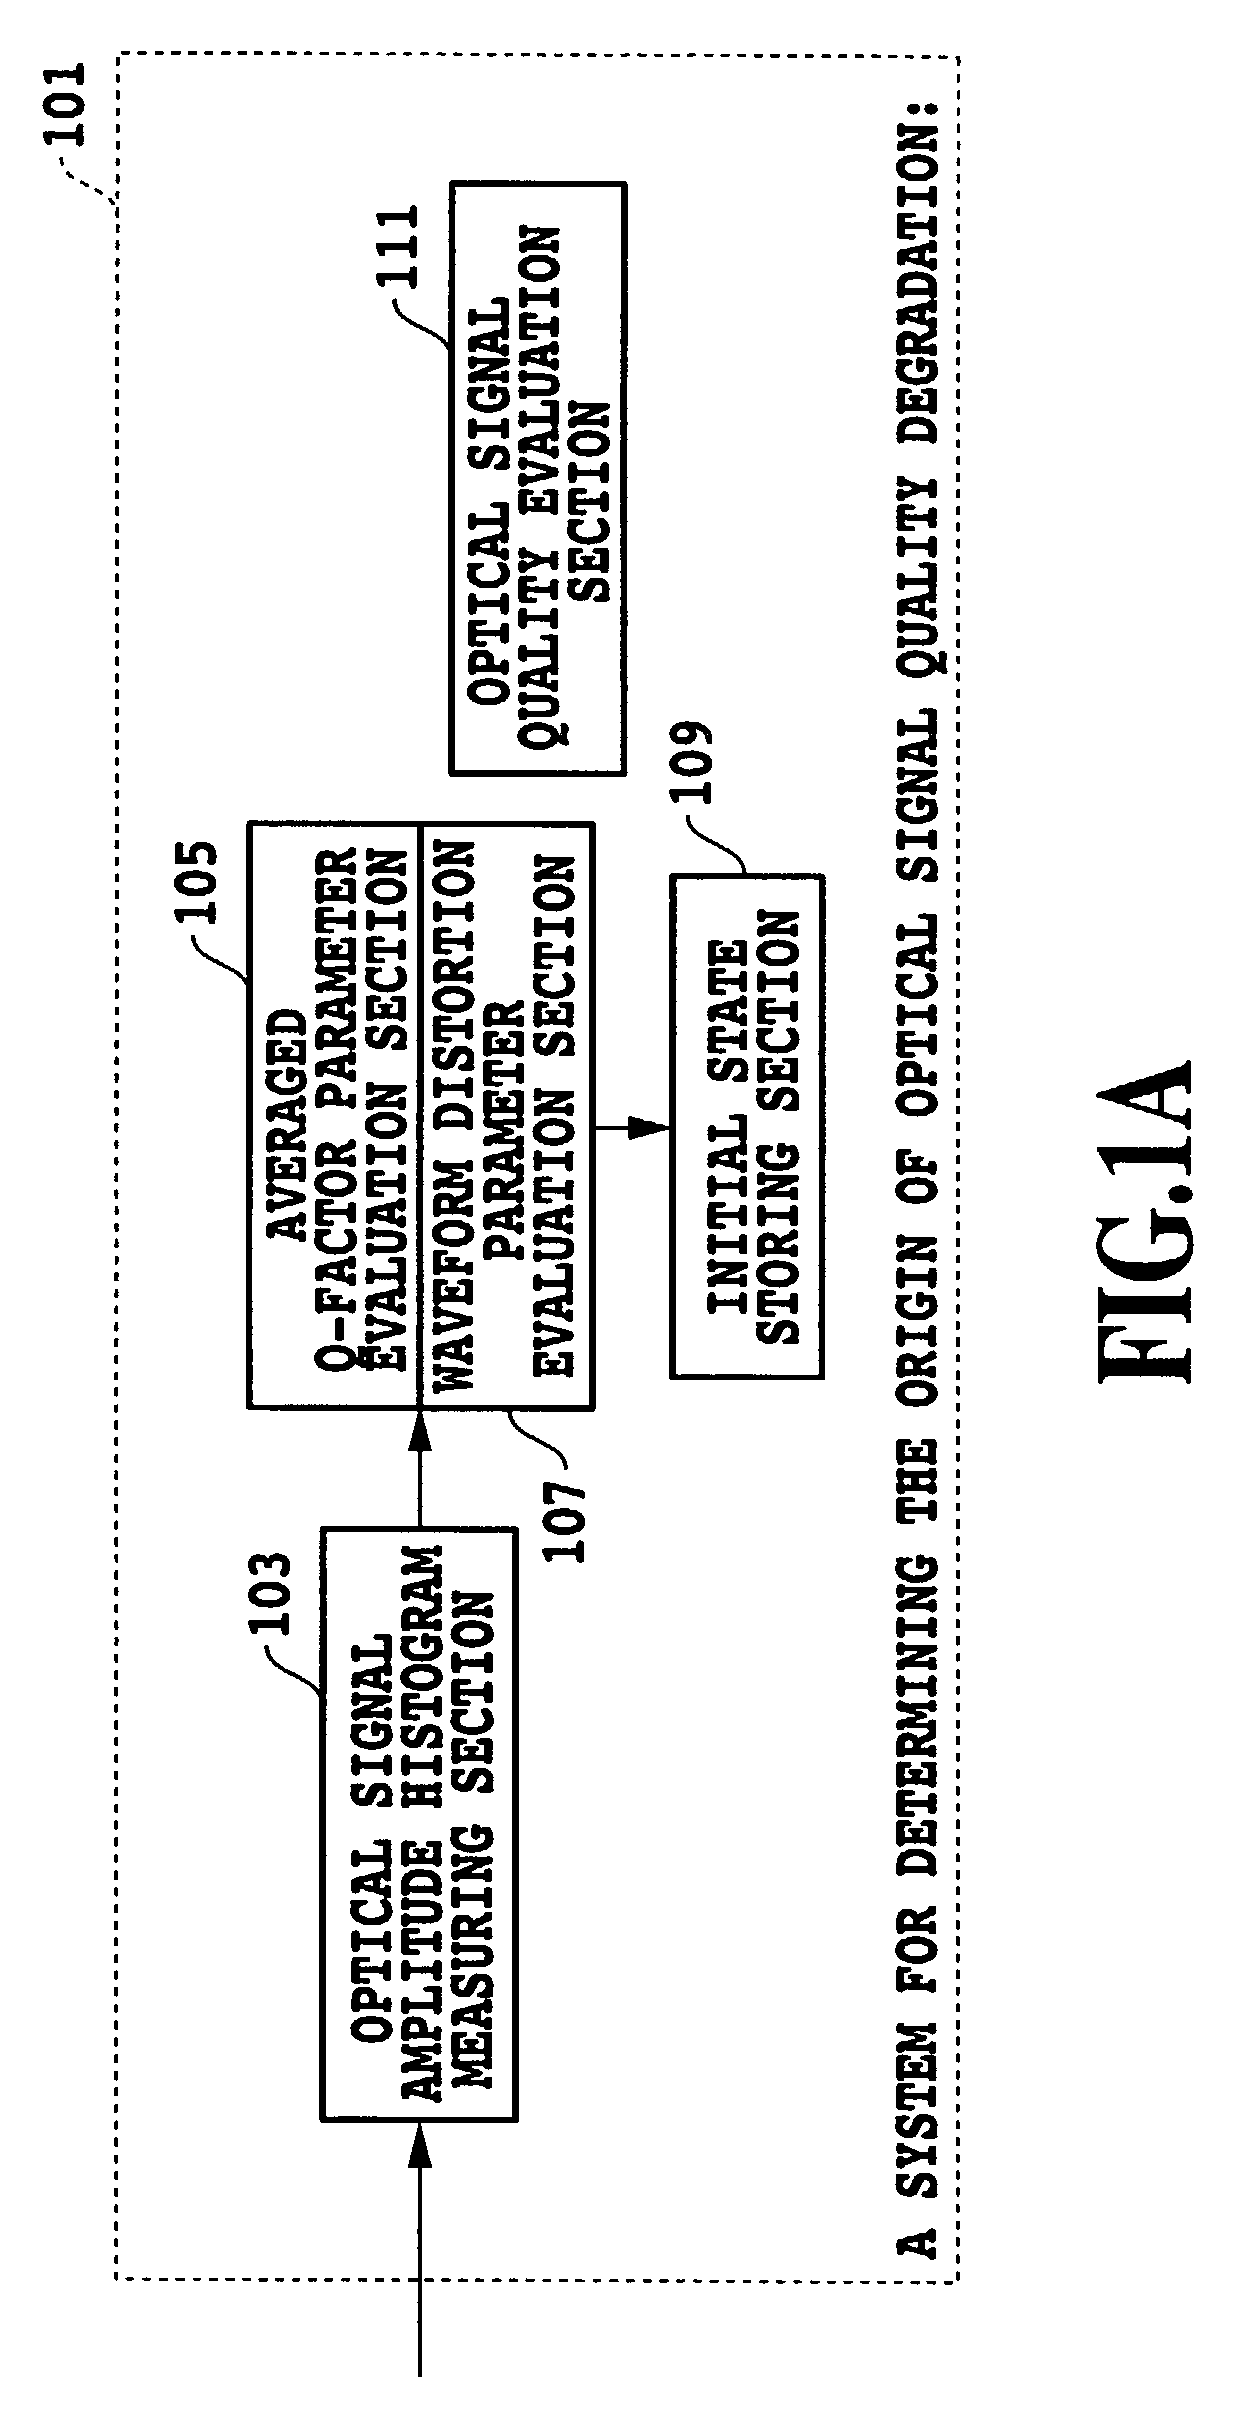 Method and system for determining origin of optical signal quality degradation